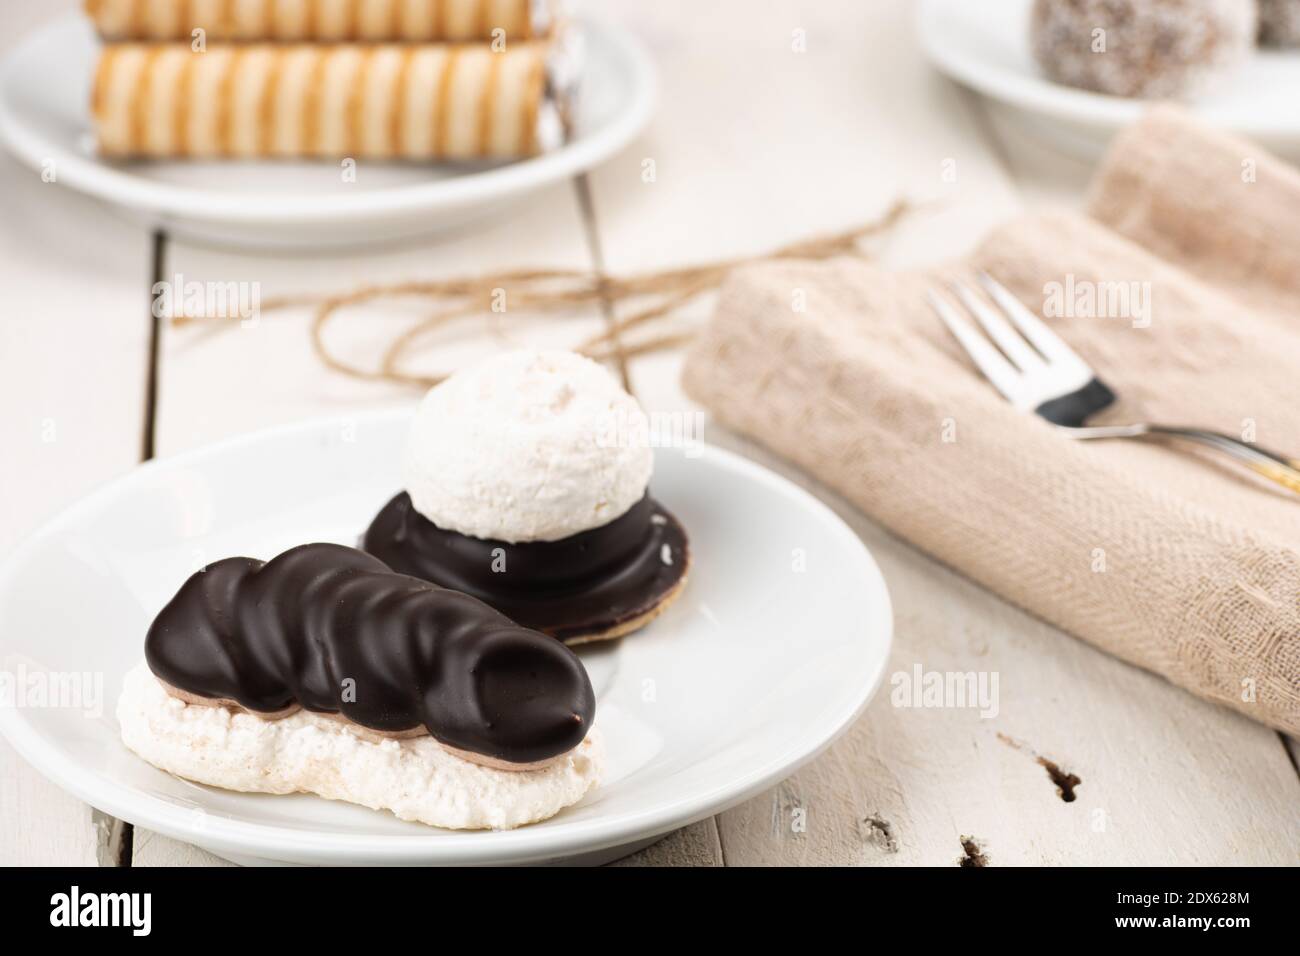 Coconut cakes with cocoa cream fill and chocolate topping. Served on wooden table and golden fork on white plate. Wedding dessert. Homemade baking Stock Photo